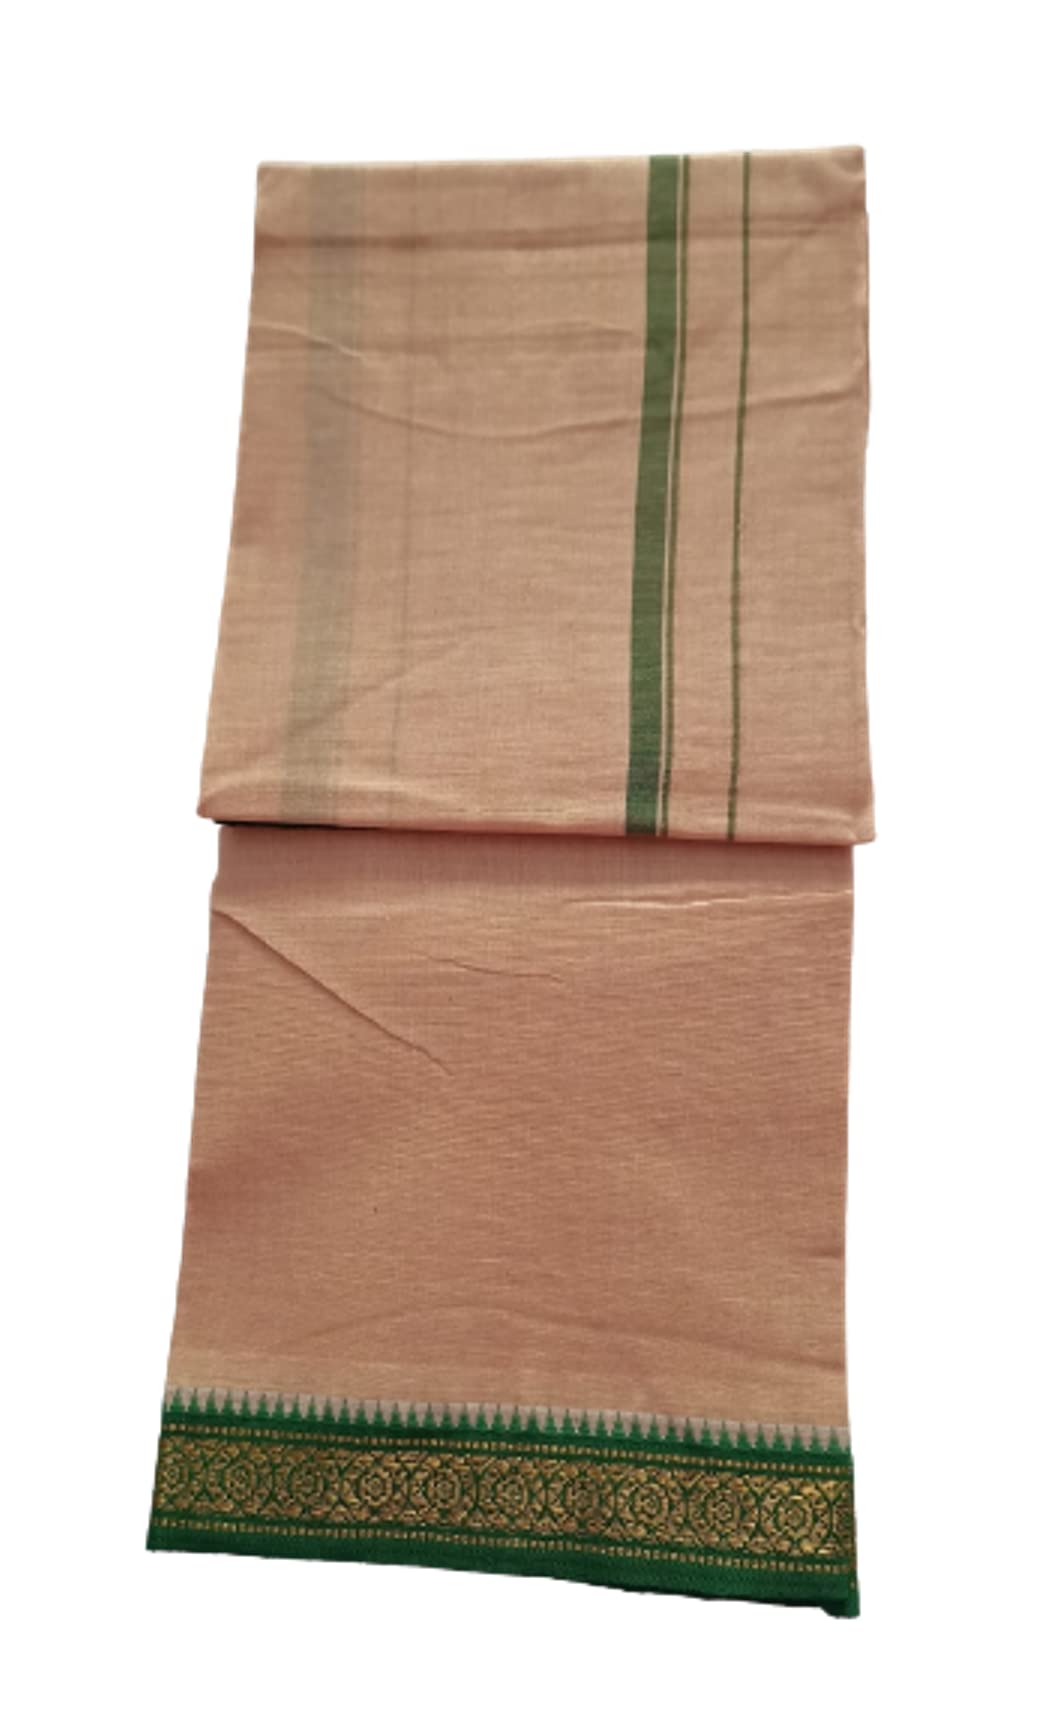 JINKA LAKSHMI COLLECTIONS Cotton Beige Color Lungi With Zari 2 Meters Unstitched Pack of 1 Multicolor (Multicolor-3)